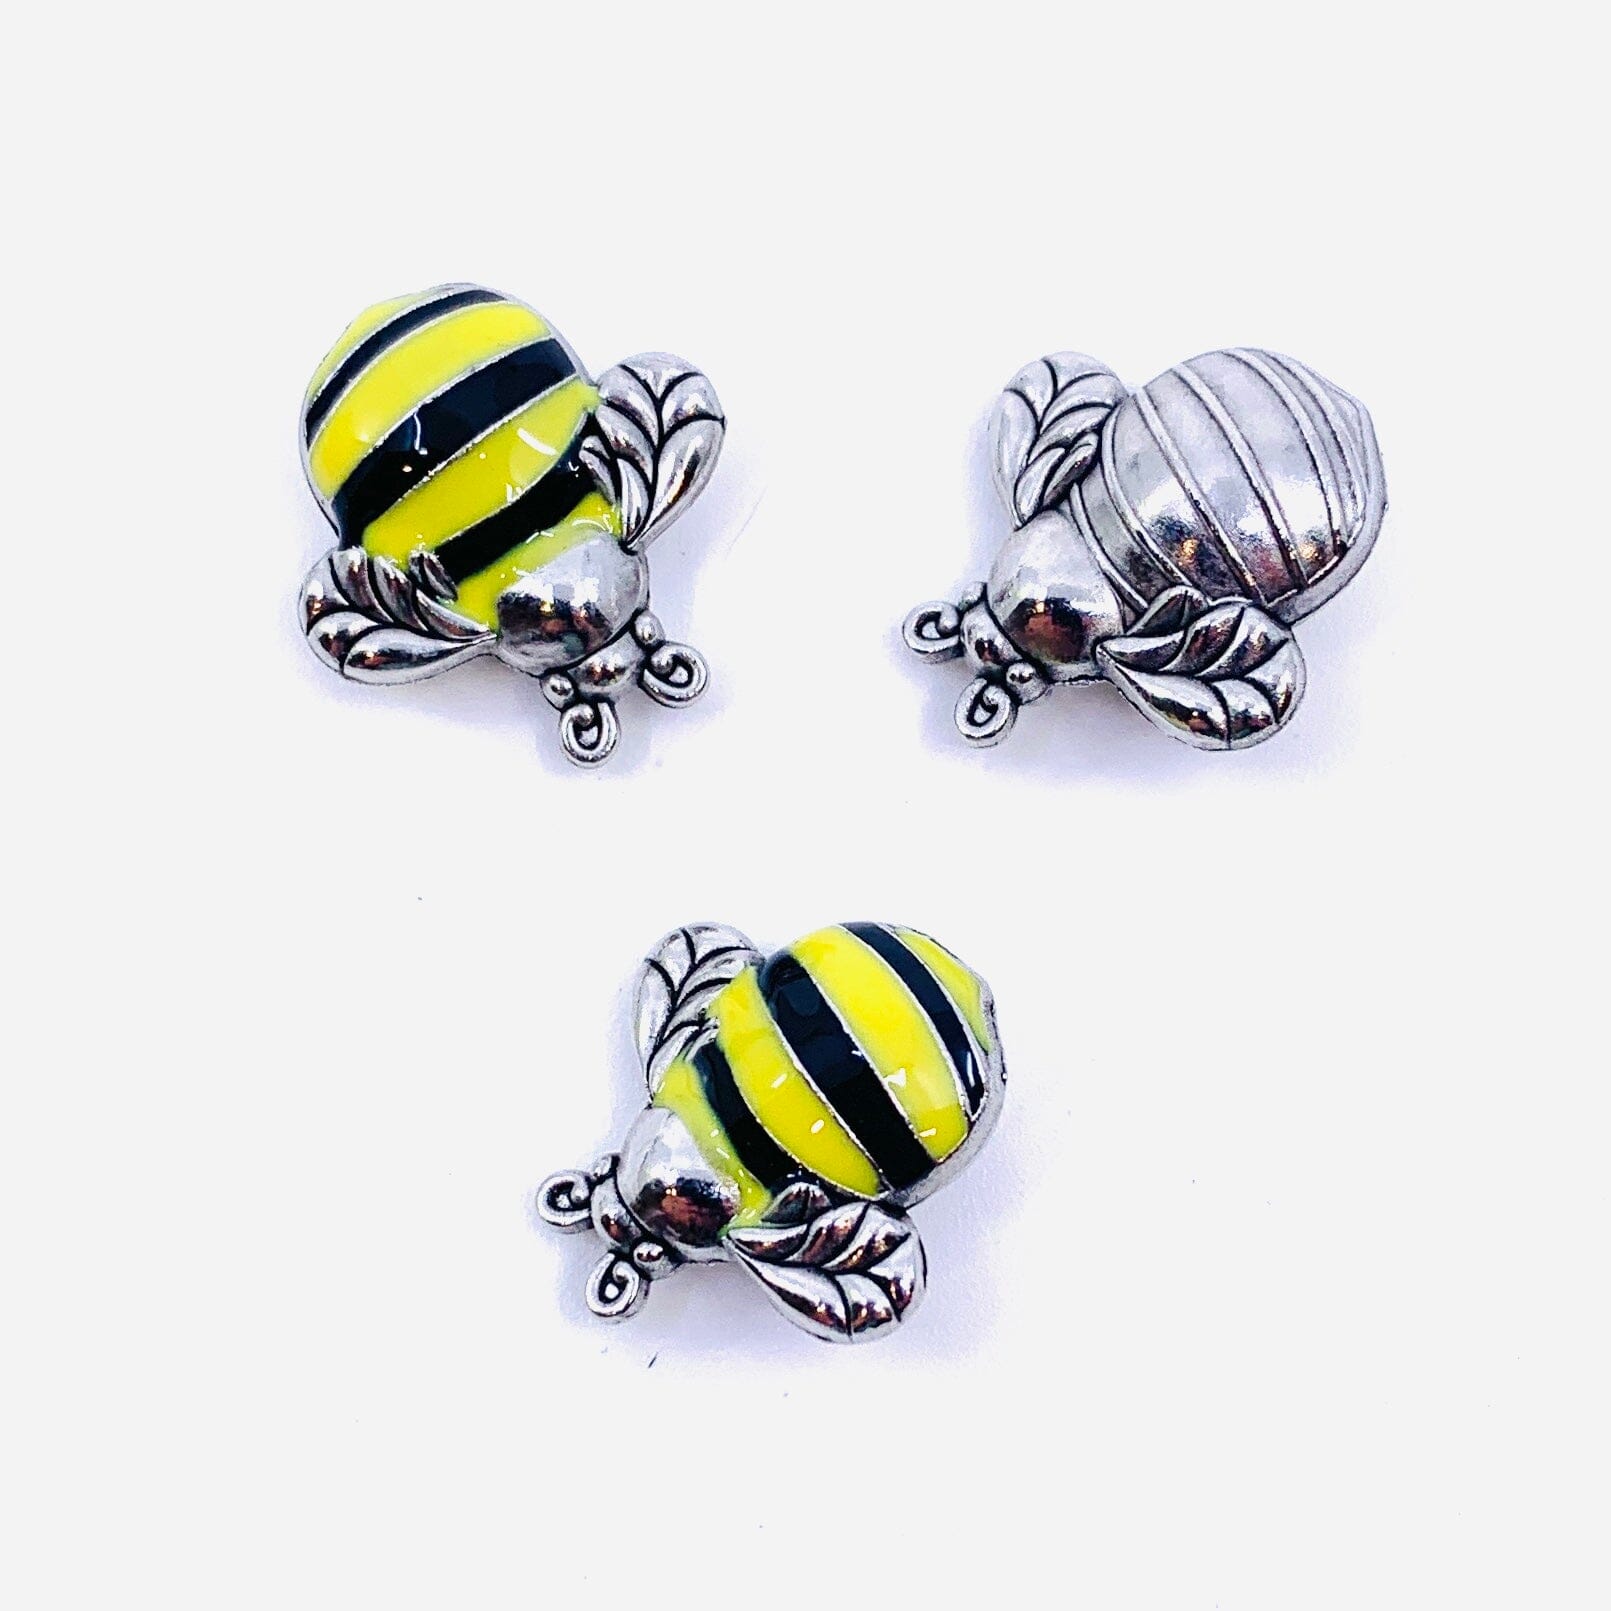 The Bumble Bee Cannot Fly Pocket Charm PT25 Miniature GANZ 